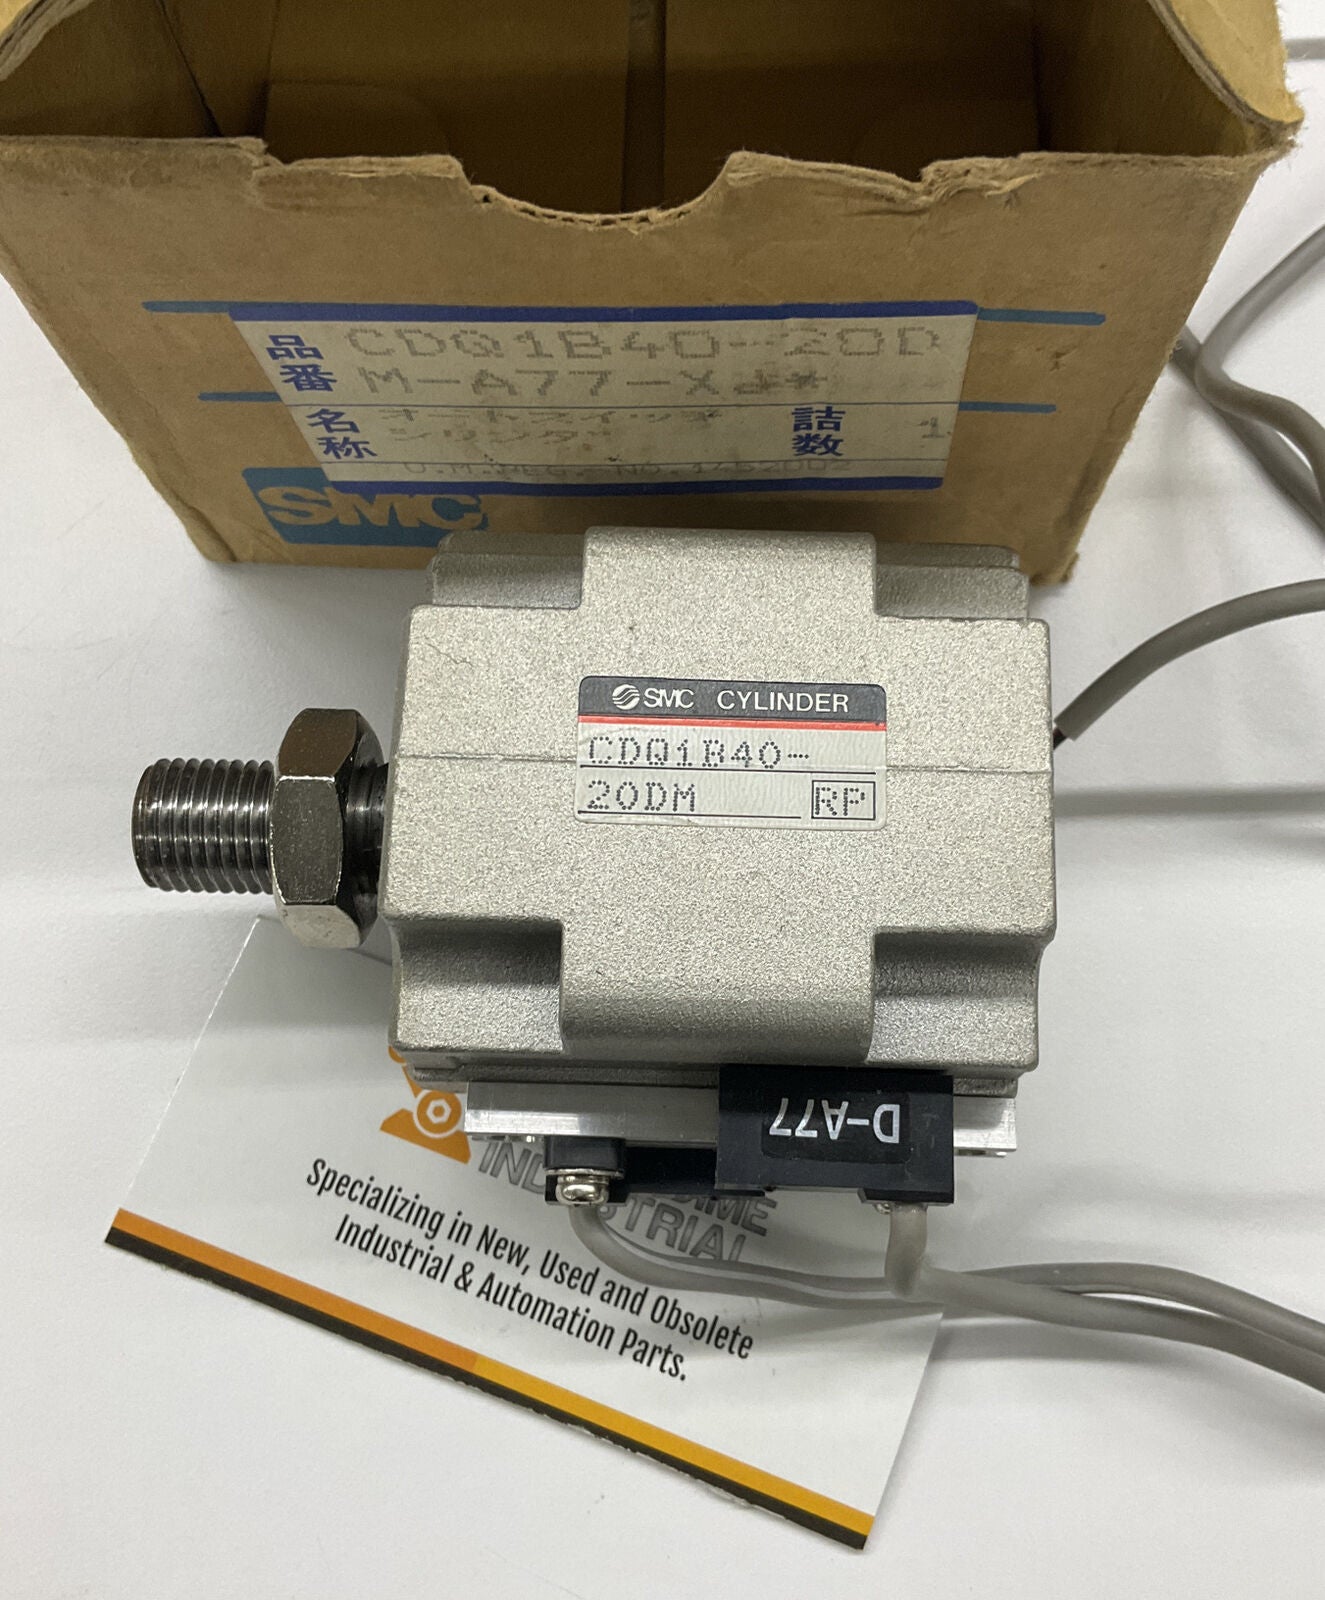 SMC New CDQ1B40-20DM Pneumatic Air Cylinder with Reed Switches / Sensors (CL166) - 0